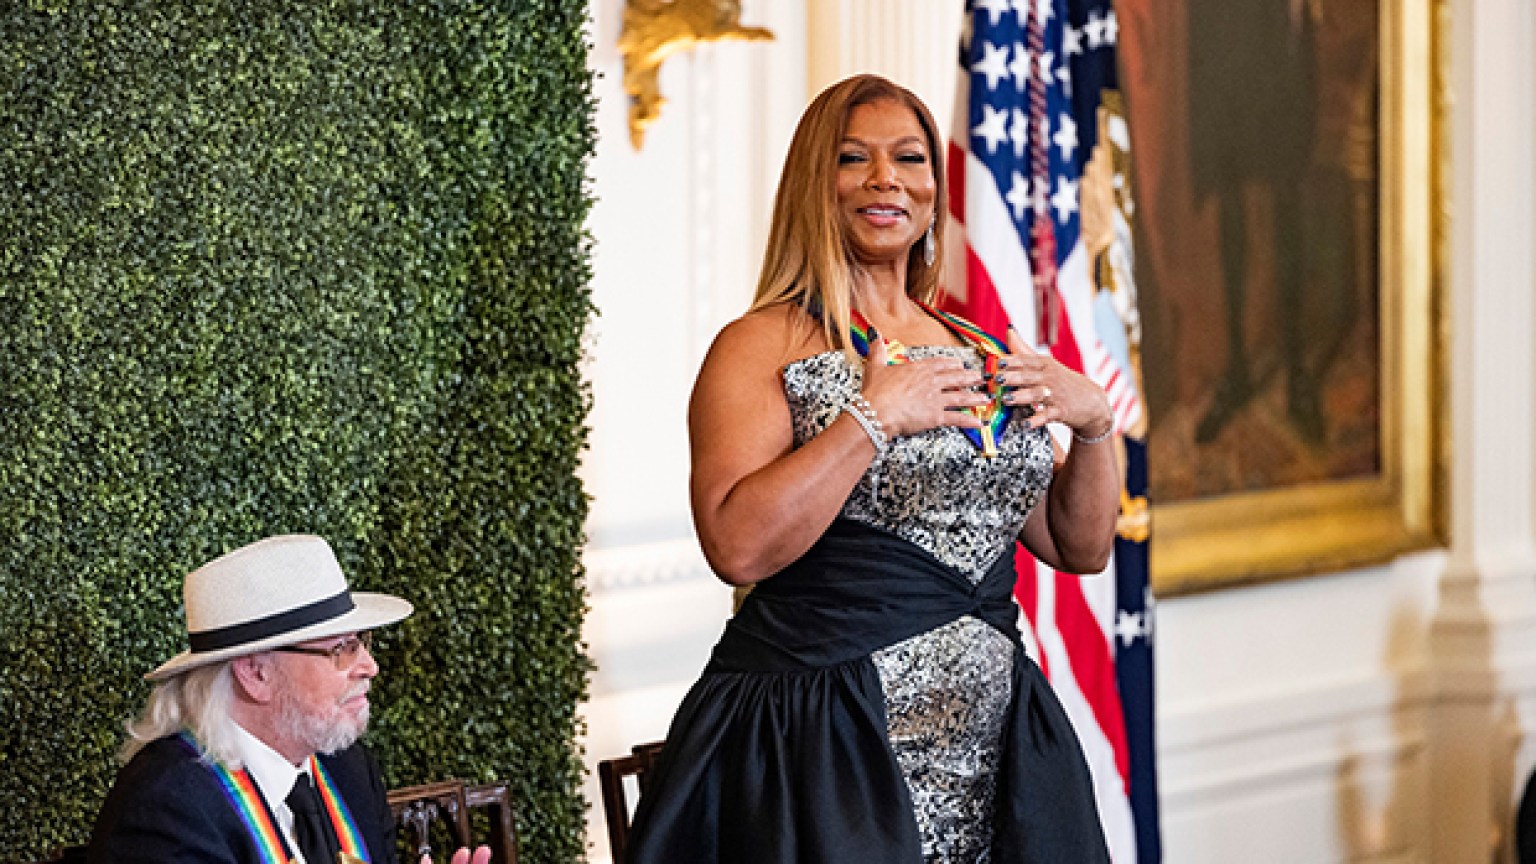 Queen Latifah dazzles in a royal black and silver metallic dress at the